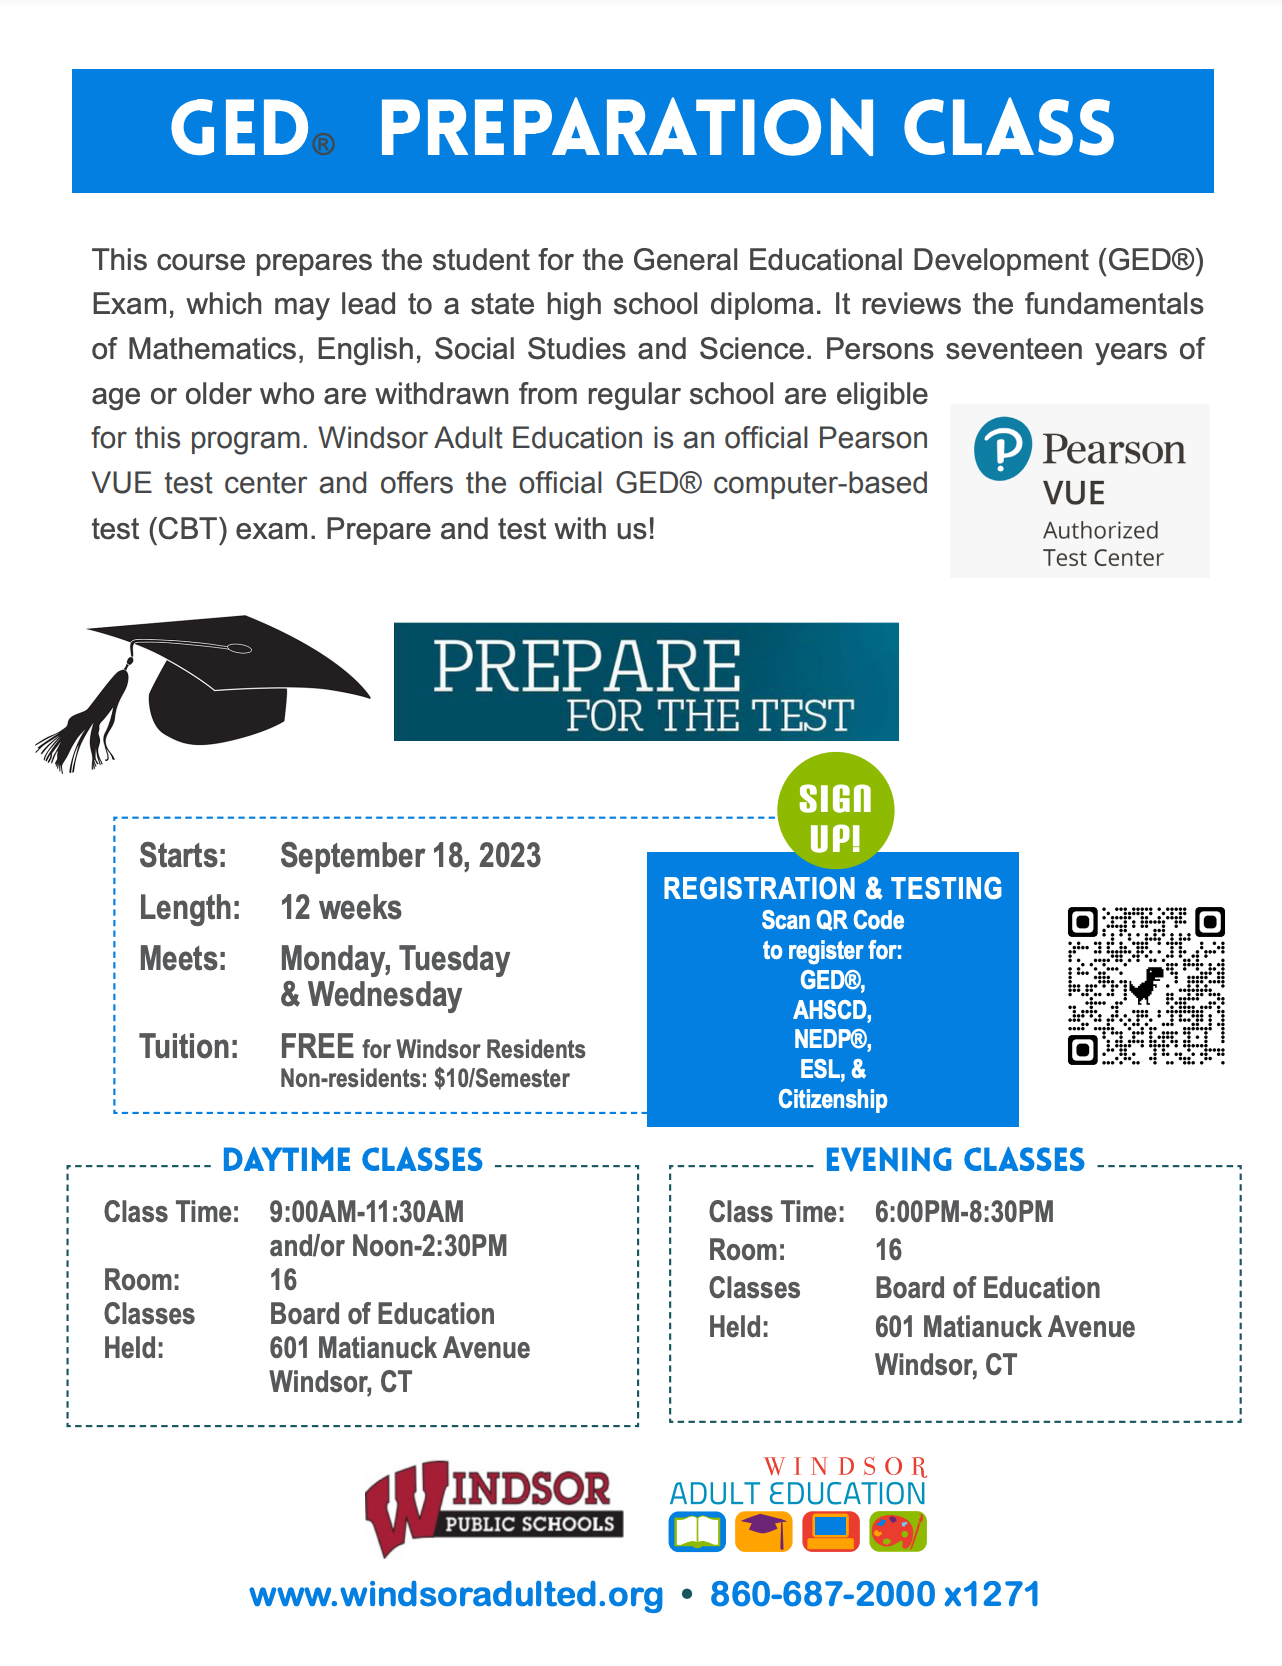 GED class - contact Adult Ed 860-687-2000 x 2173